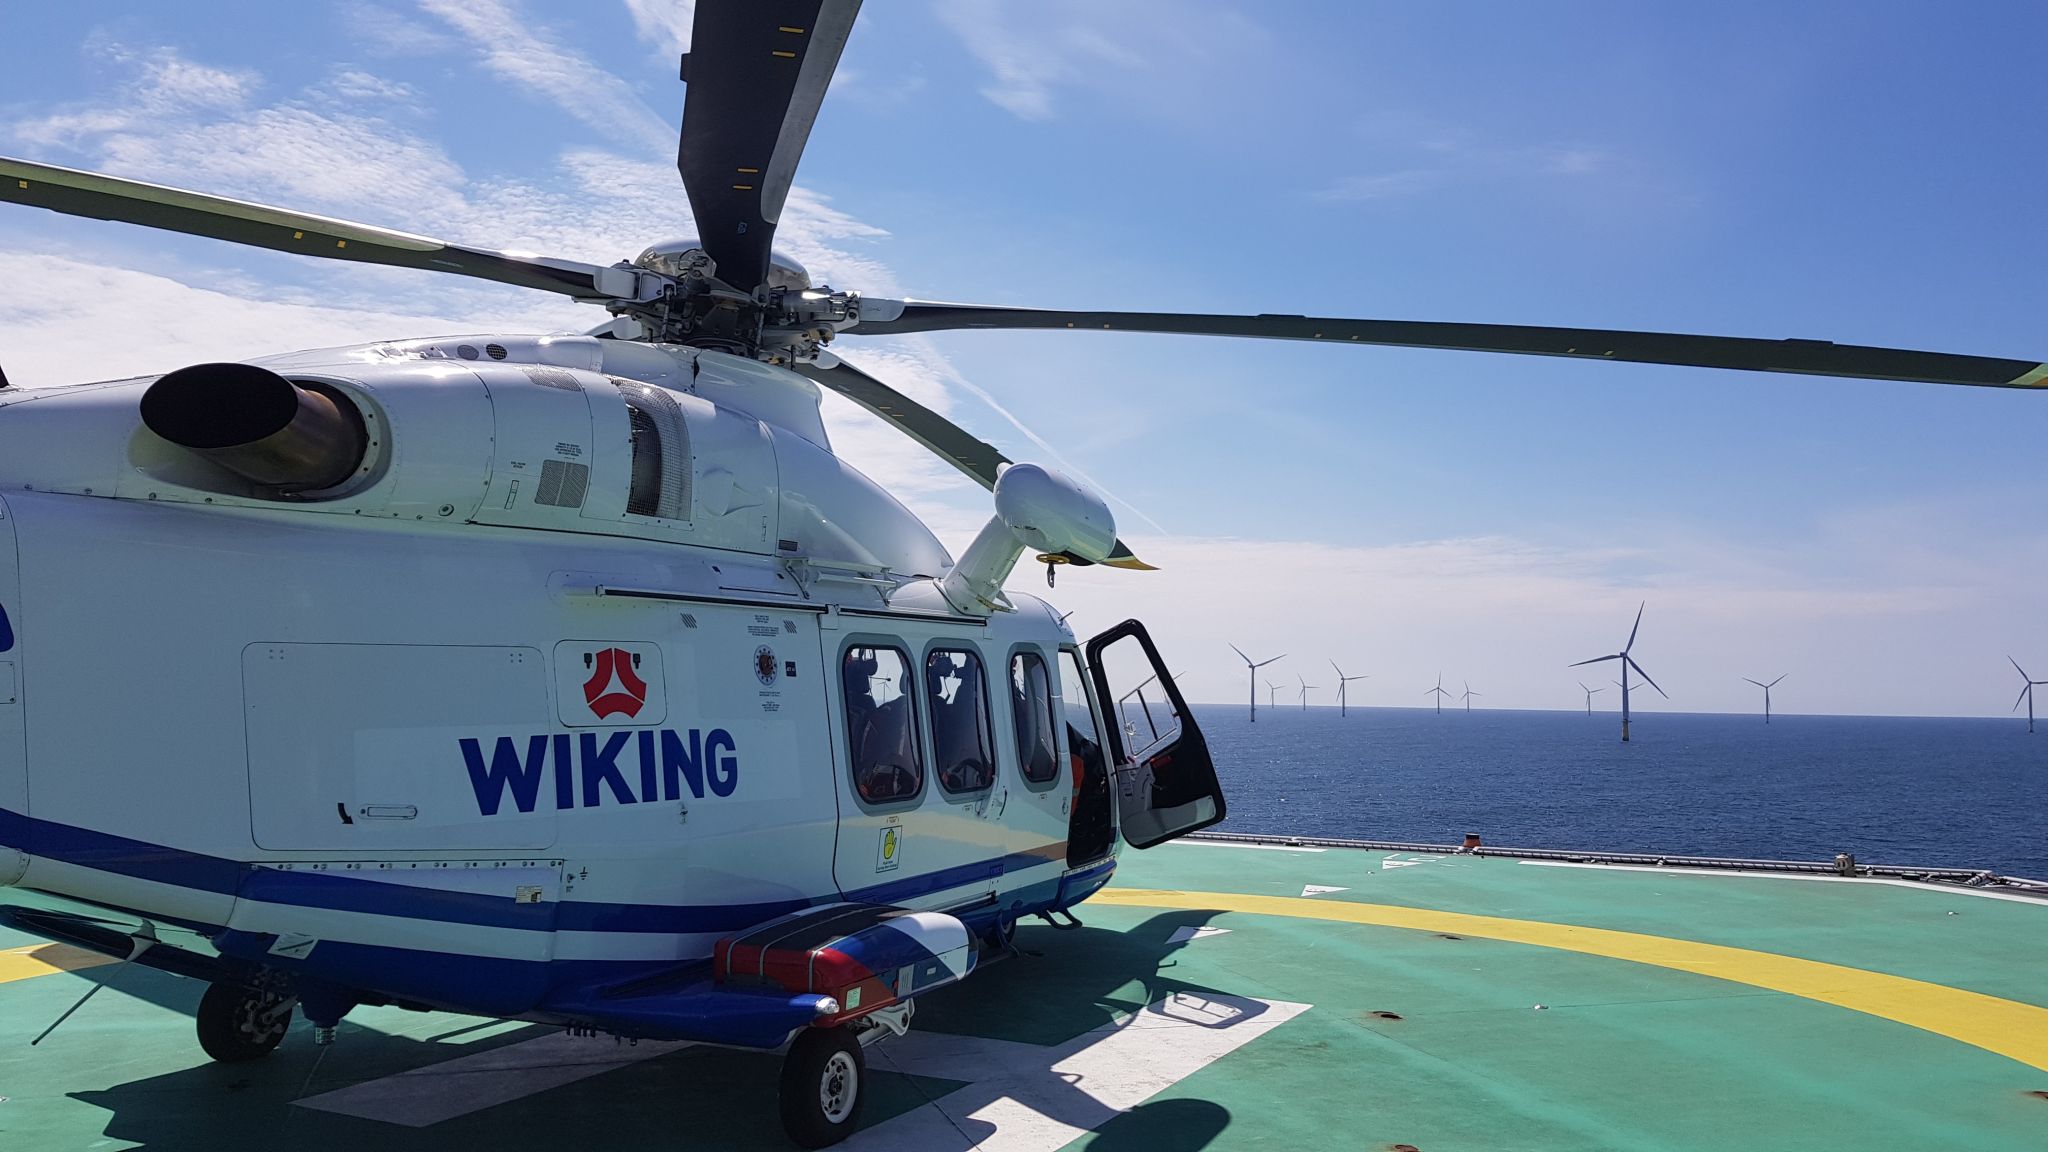 A WIKING offshore helicopter on a deck at an offshore wind farm